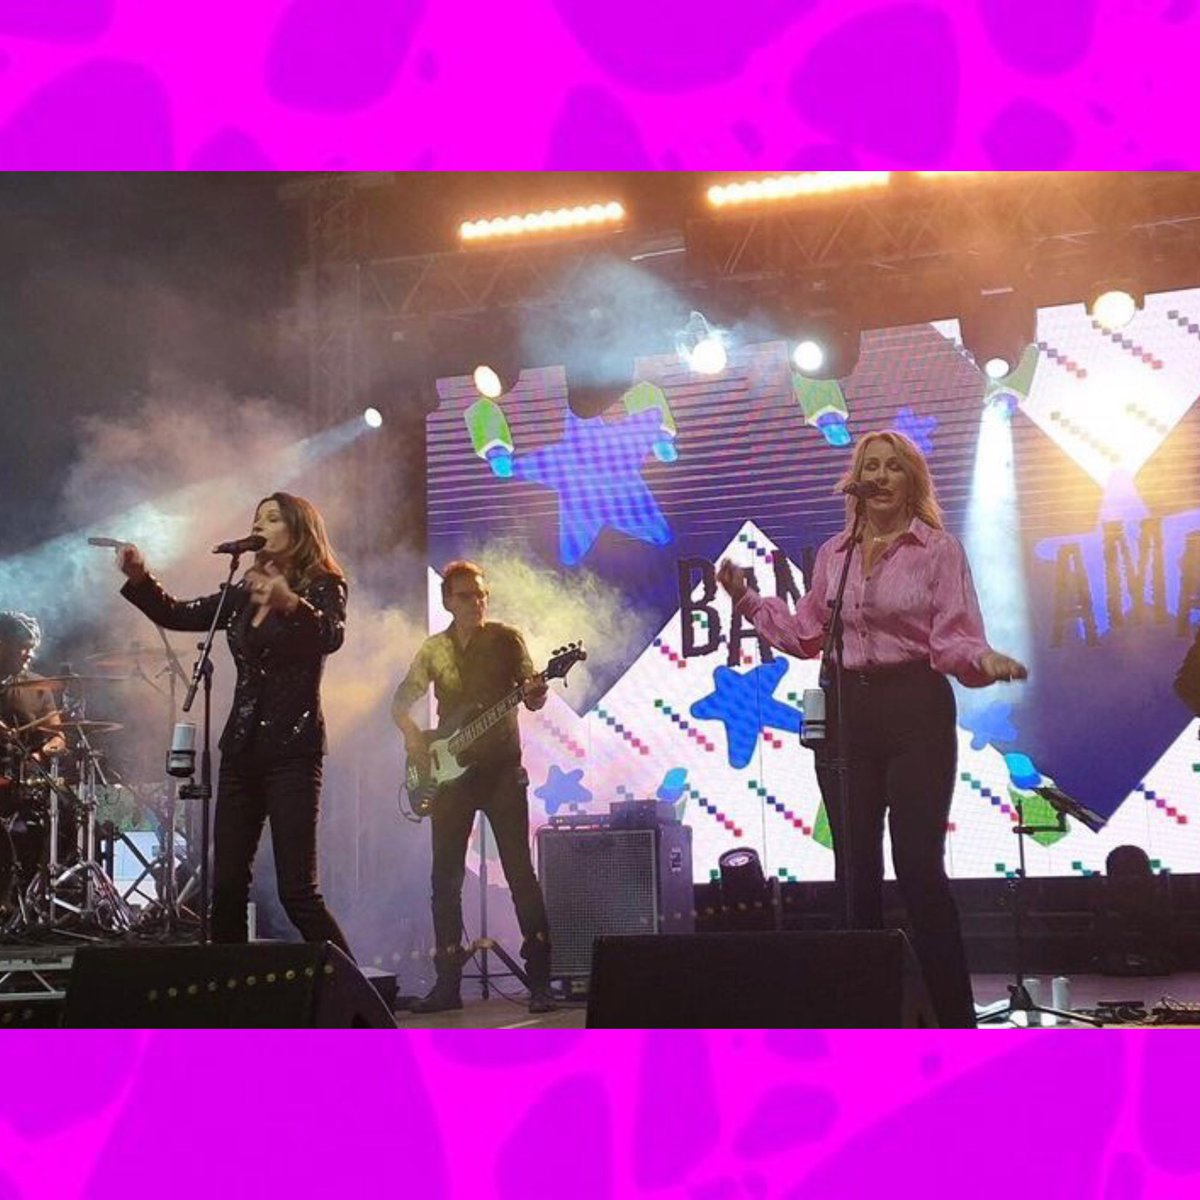 Flashback to 2019 performing @mightyhoopla 🎉 We’re thrilled to be back this Saturday 1st June to kickstart our summer festivals! We can’t wait to see you there☀️